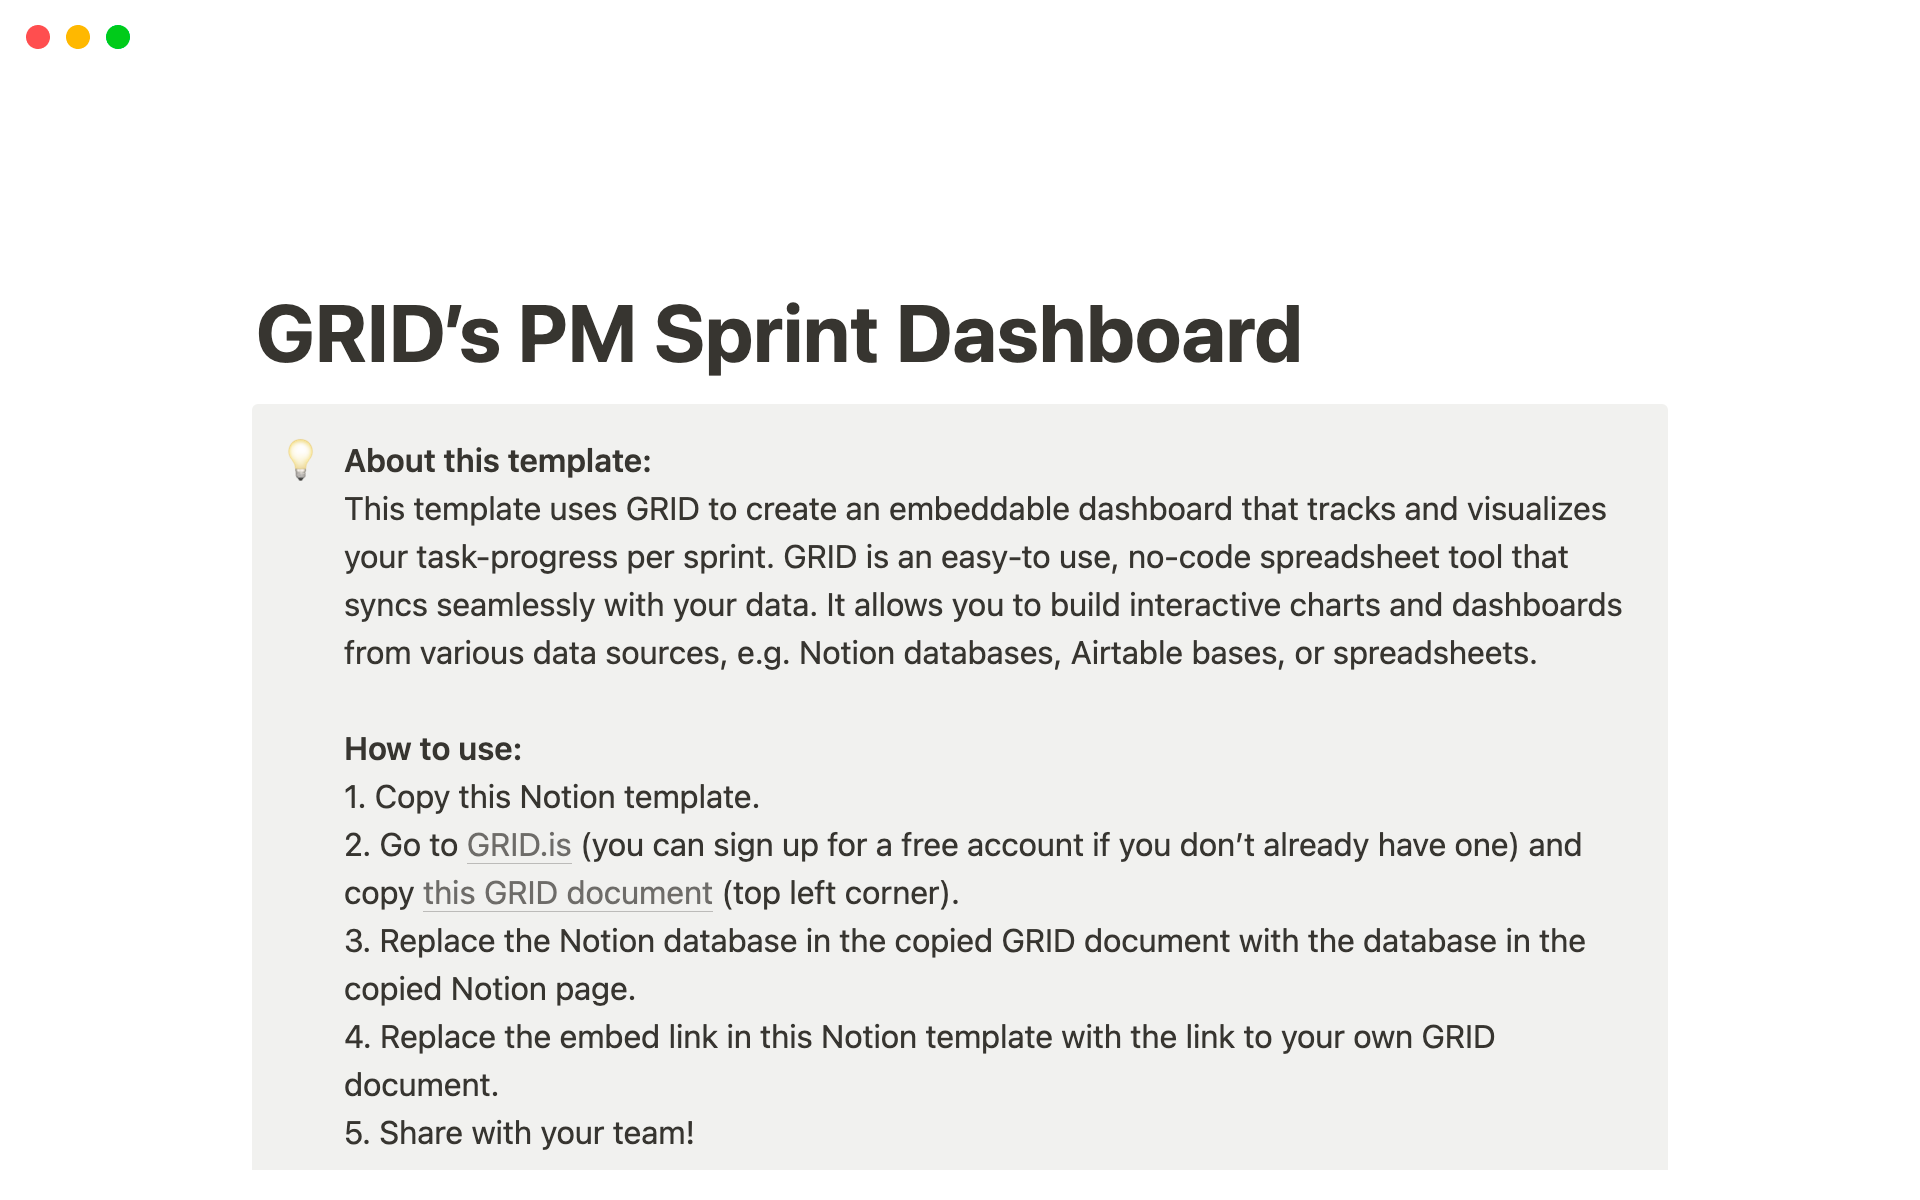 This template uses GRID to create a dashboard that tracks and visualizes your task-progress per sprint.